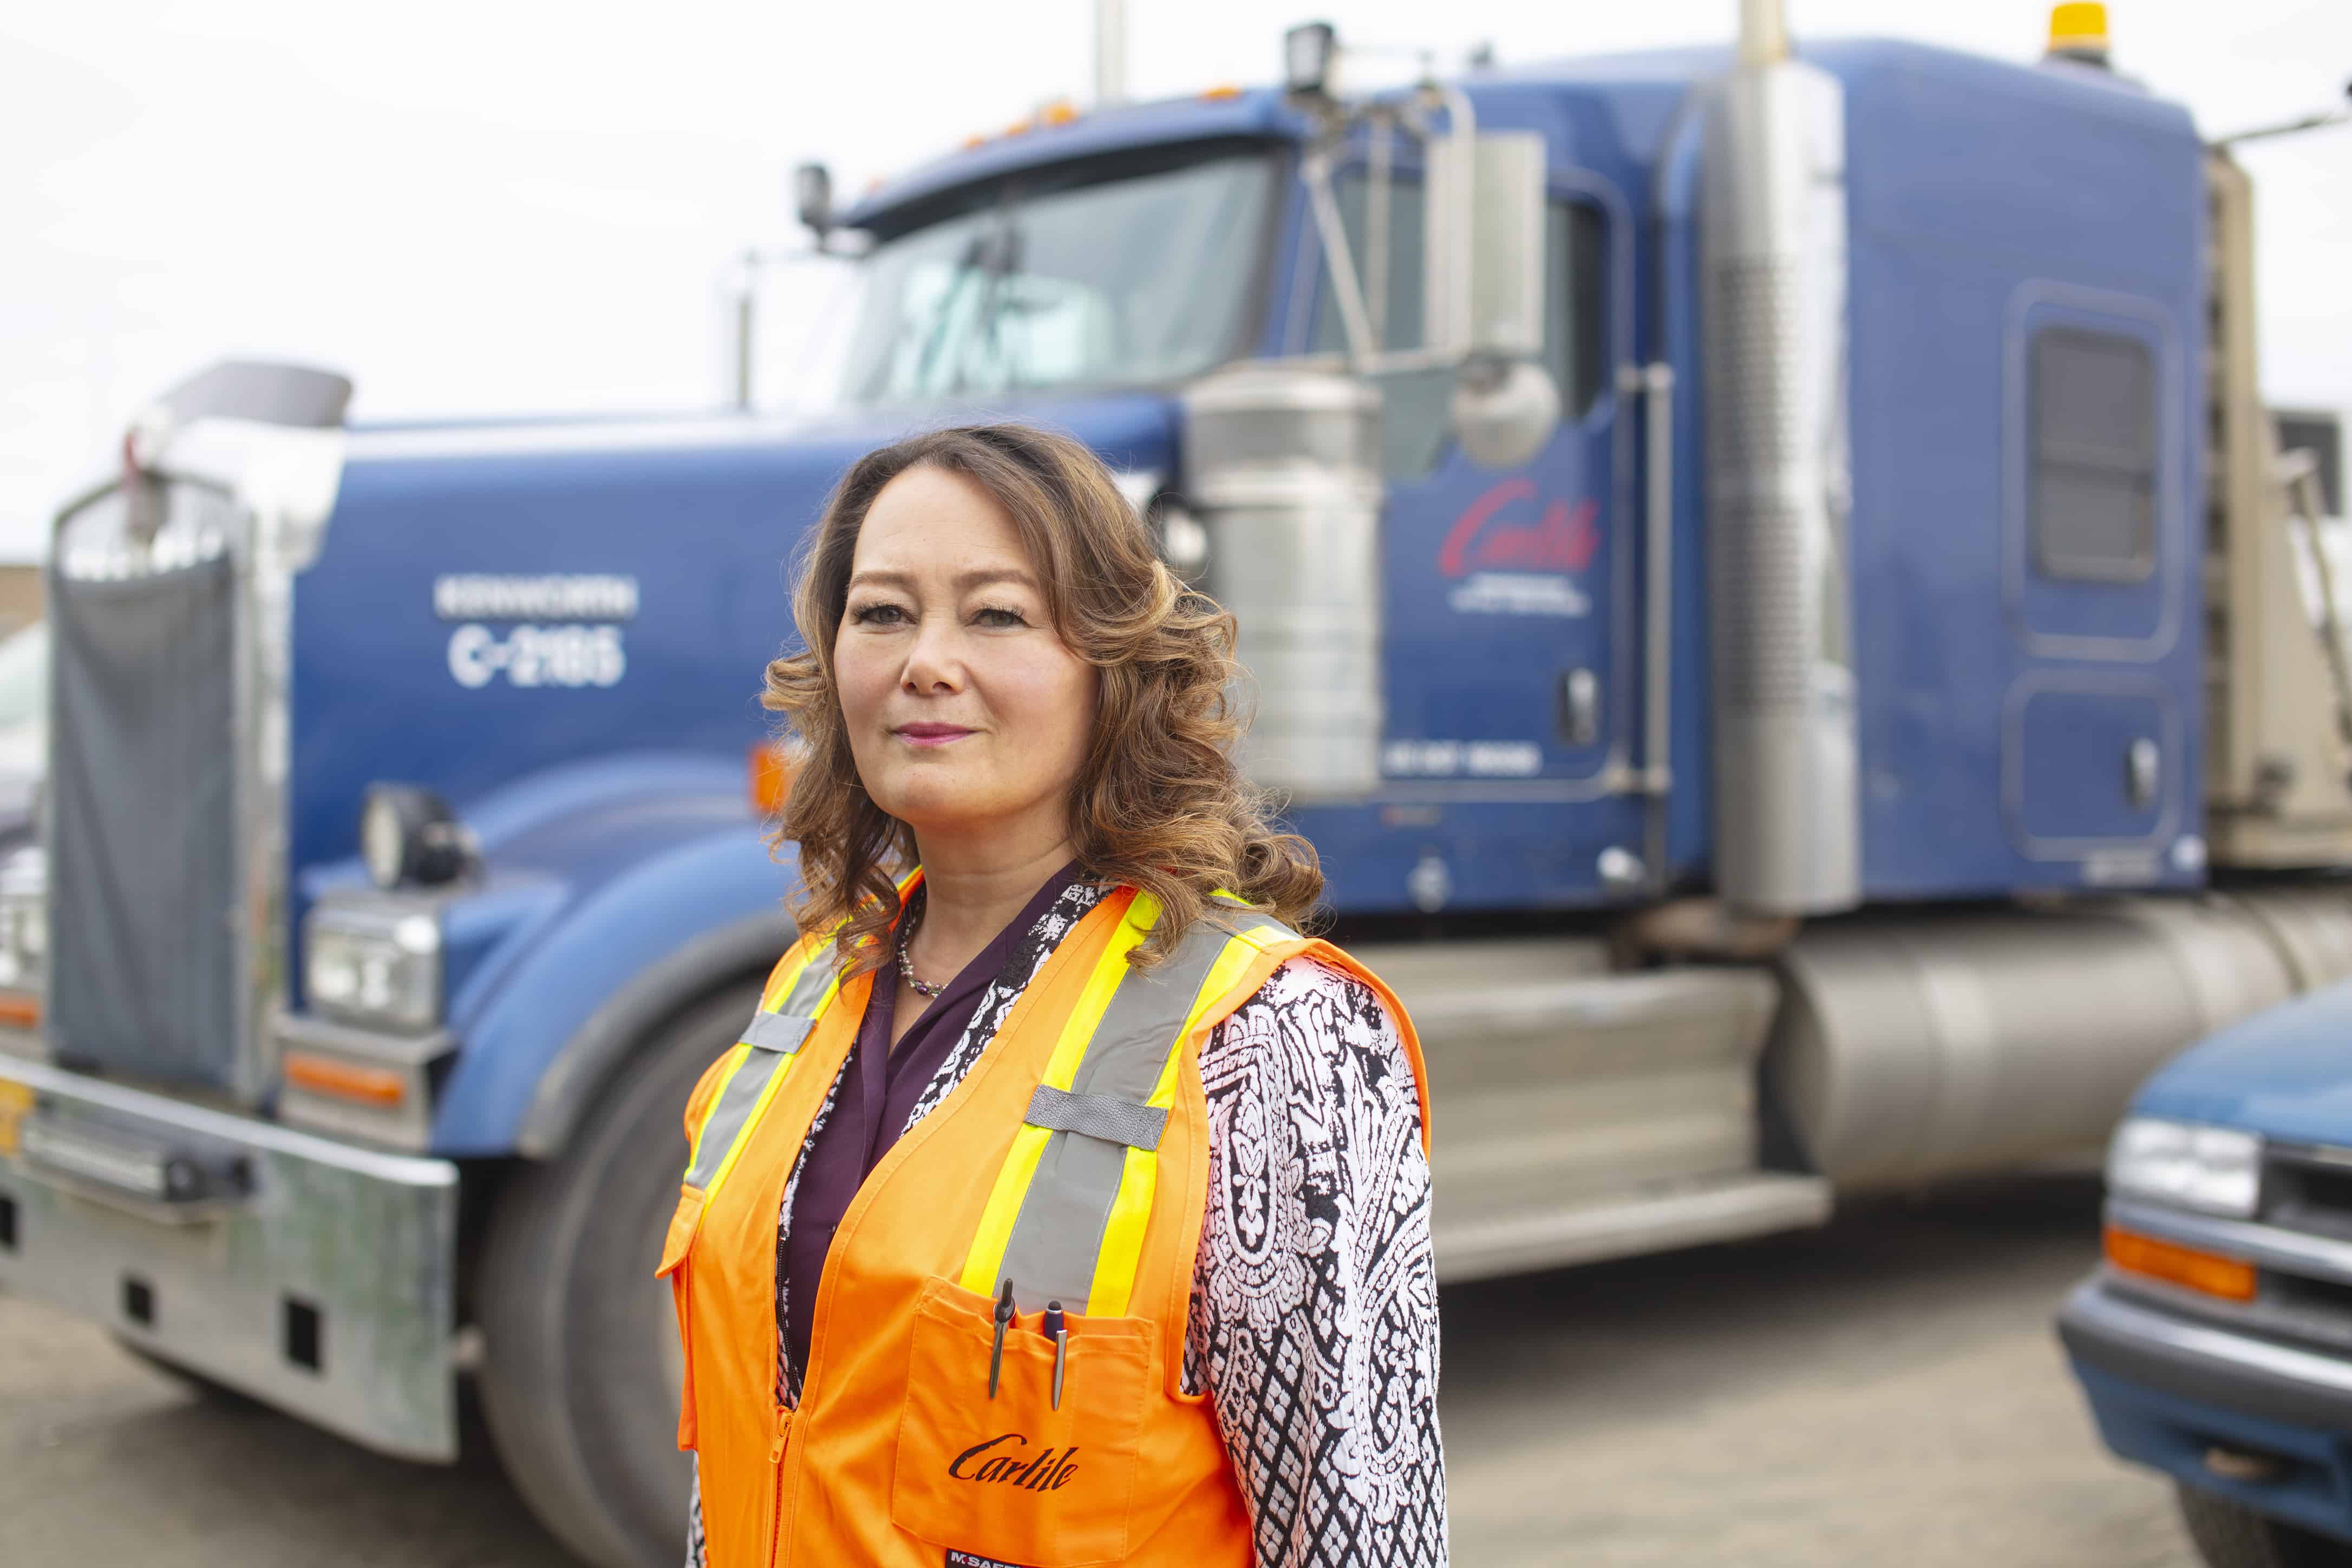 Lisa wears an orange Carlile reflective vest in front of a Carlile truck cab.